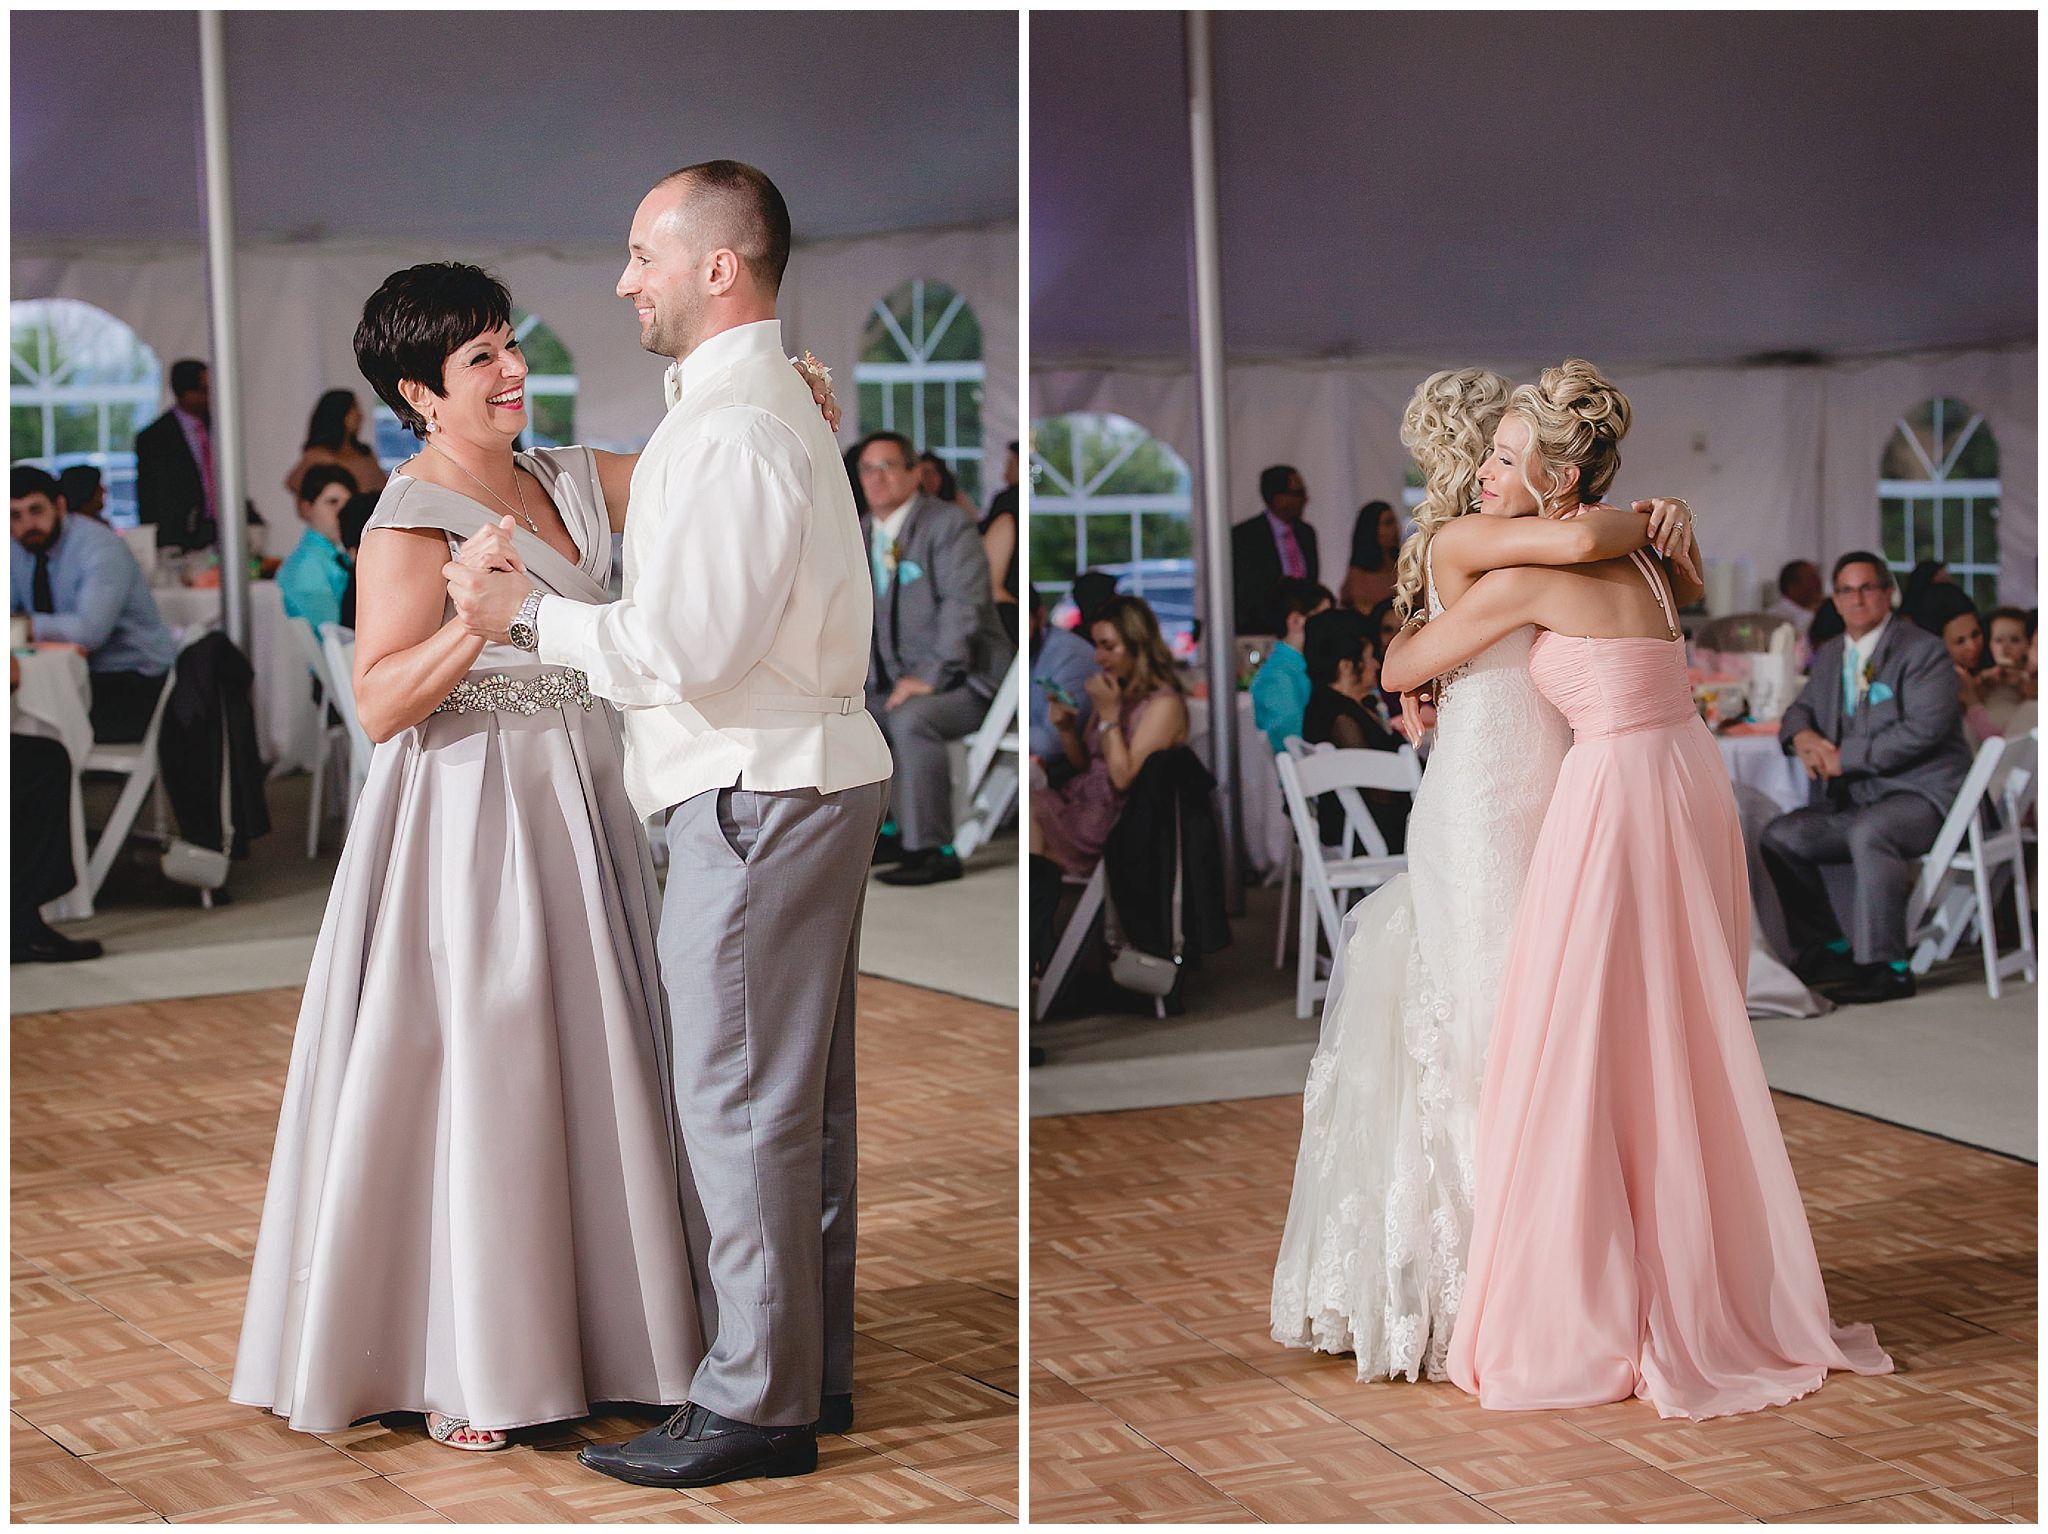 Mothers of the groom and bride dance with their children